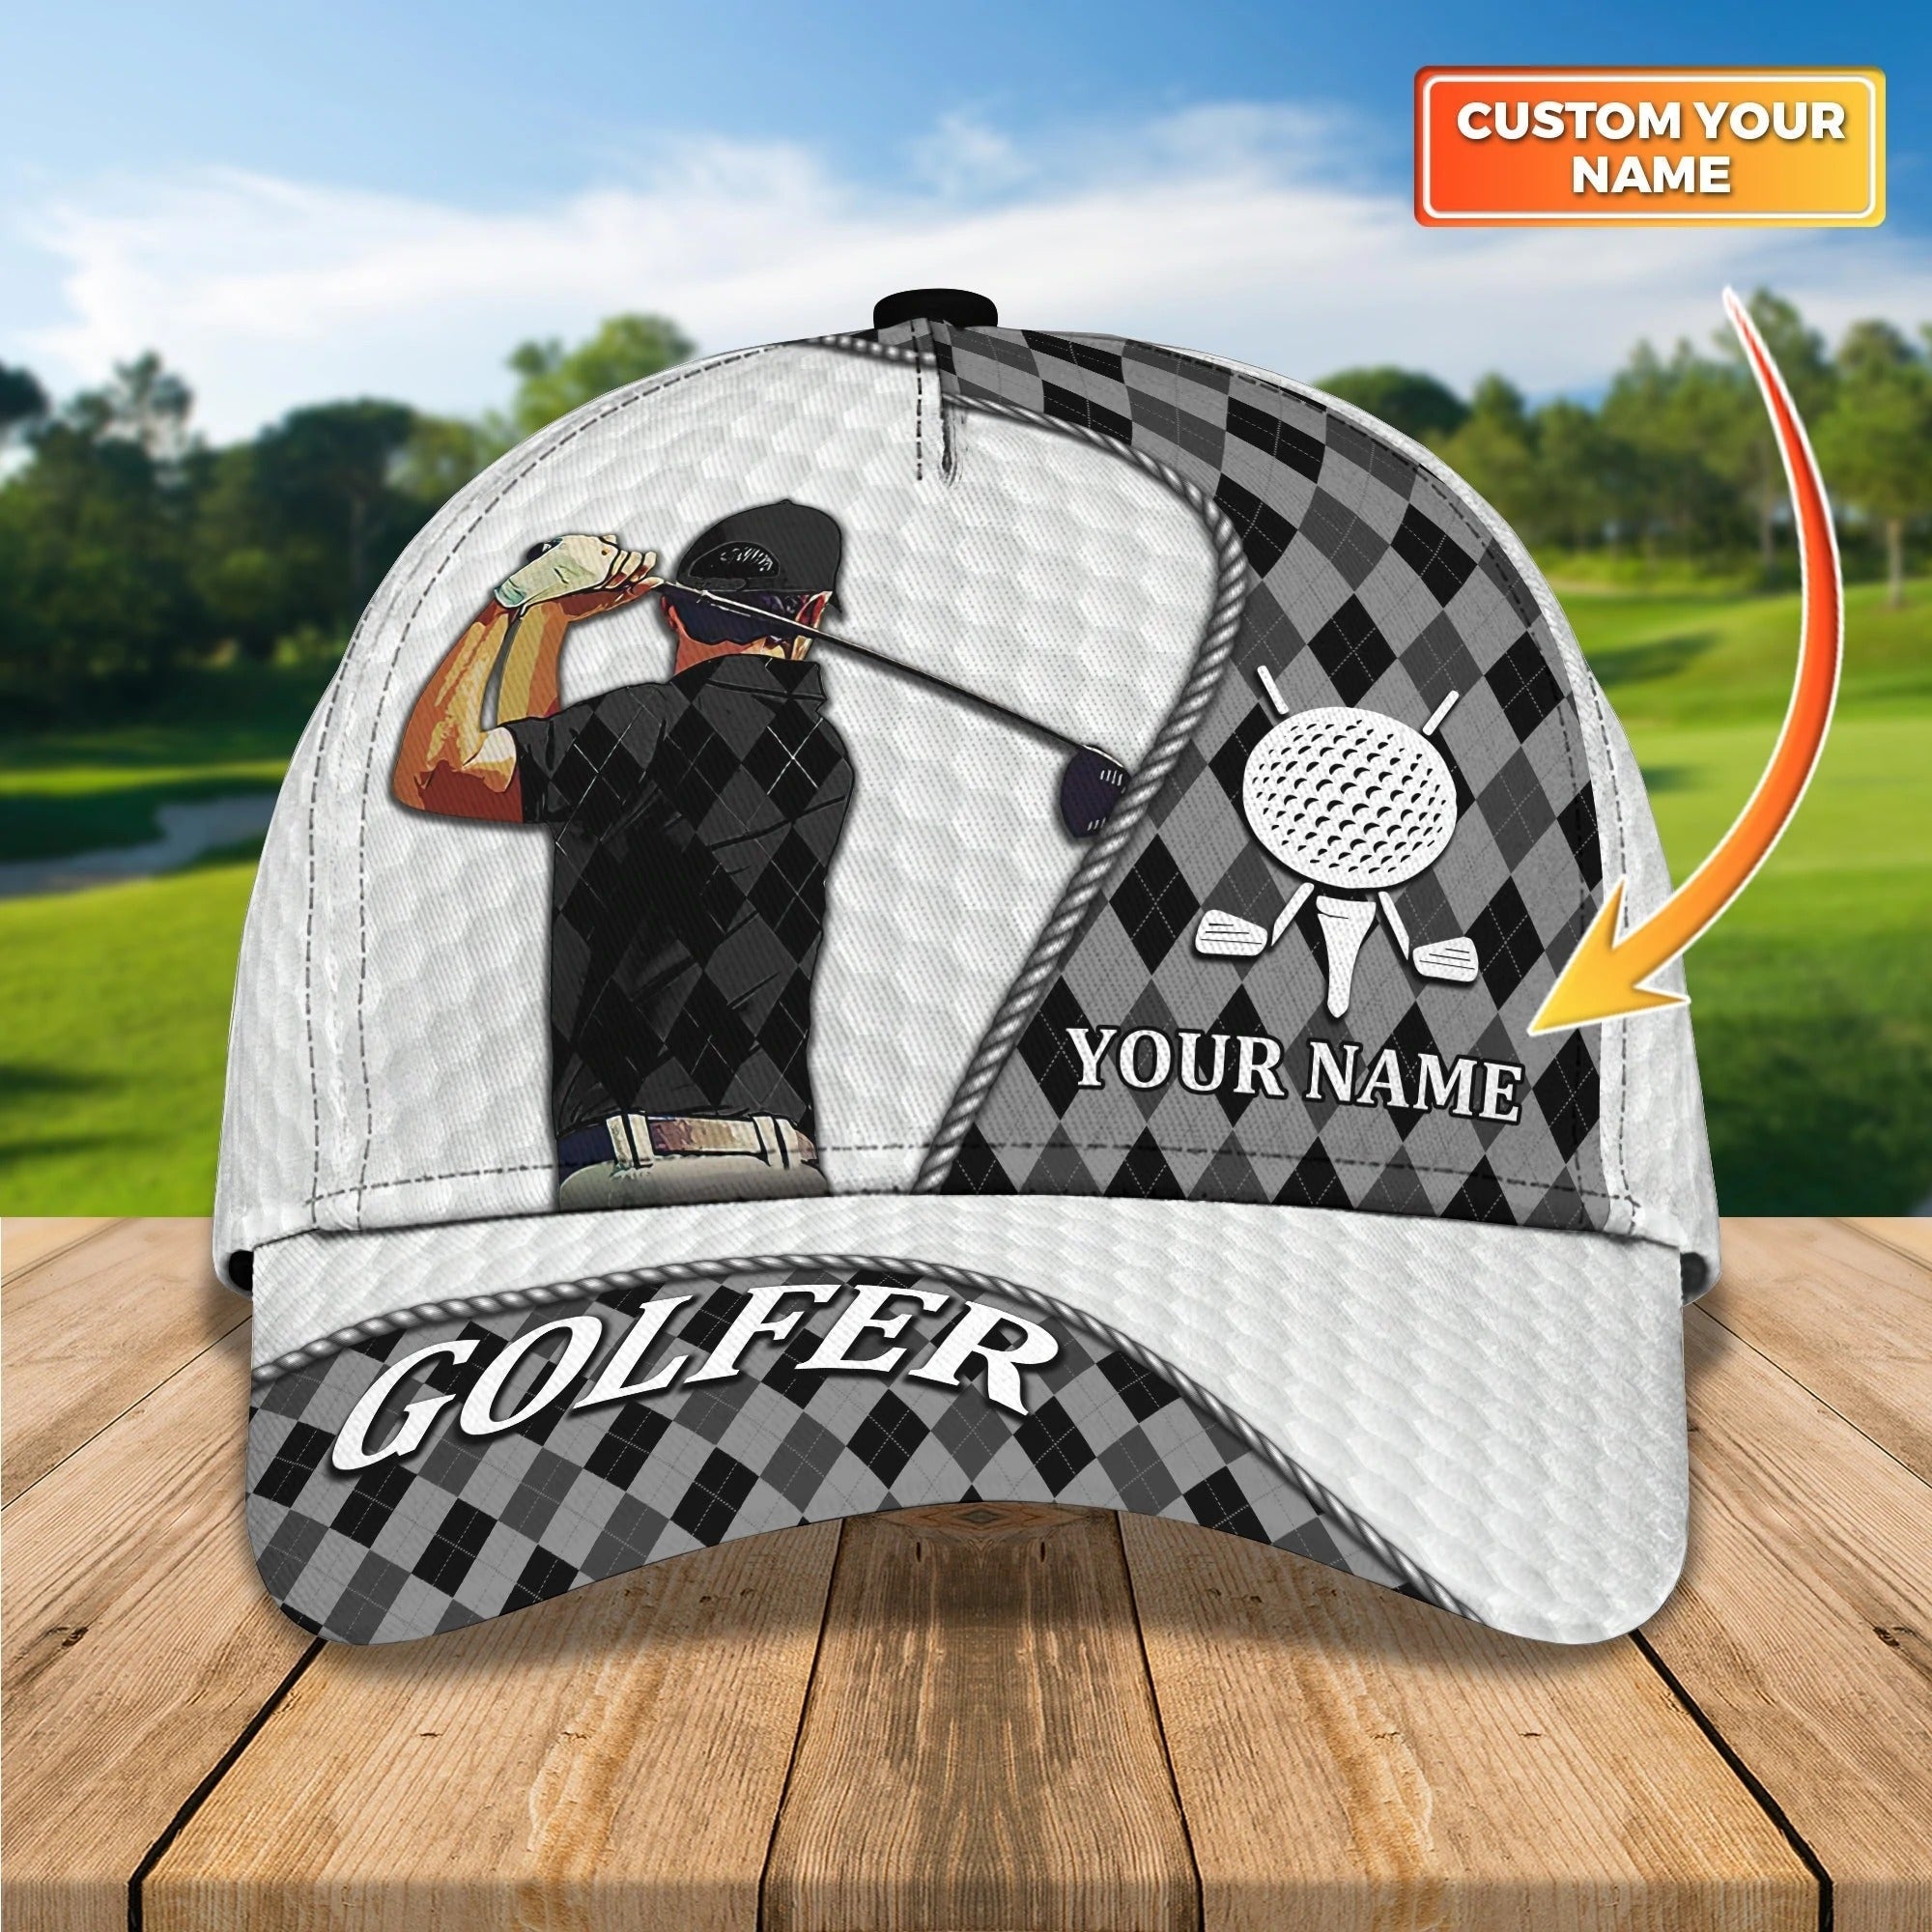 Customized Full-Print Golf Cap for Men, 3D Baseball Hat for Golfers, Ideal Golf Gifts for Dads and Father’s Day, Perfect Present for Golf Enthusiasts – GP029